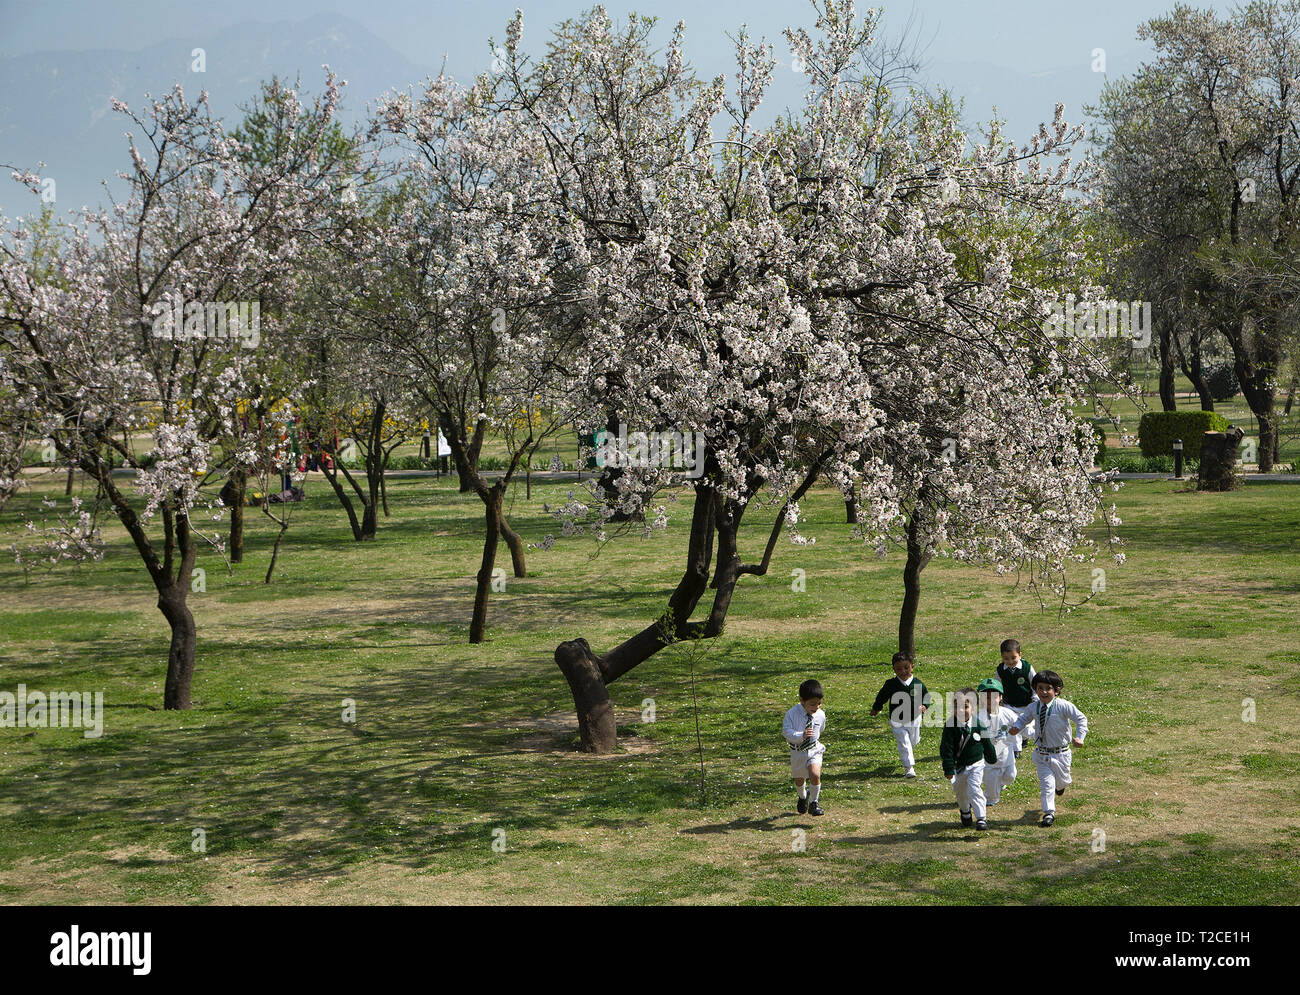 Srinagar, Indian-controlled Kashmir. 1st Apr, 2019. School children play near blossoming trees in Srinagar, the summer capital of Indian-controlled Kashmir, April 1, 2019. Indian-controlled Kashmir witnesses the arrival of spring after the long spell of winter season. Credit: Javed Dar/Xinhua/Alamy Live News Stock Photo